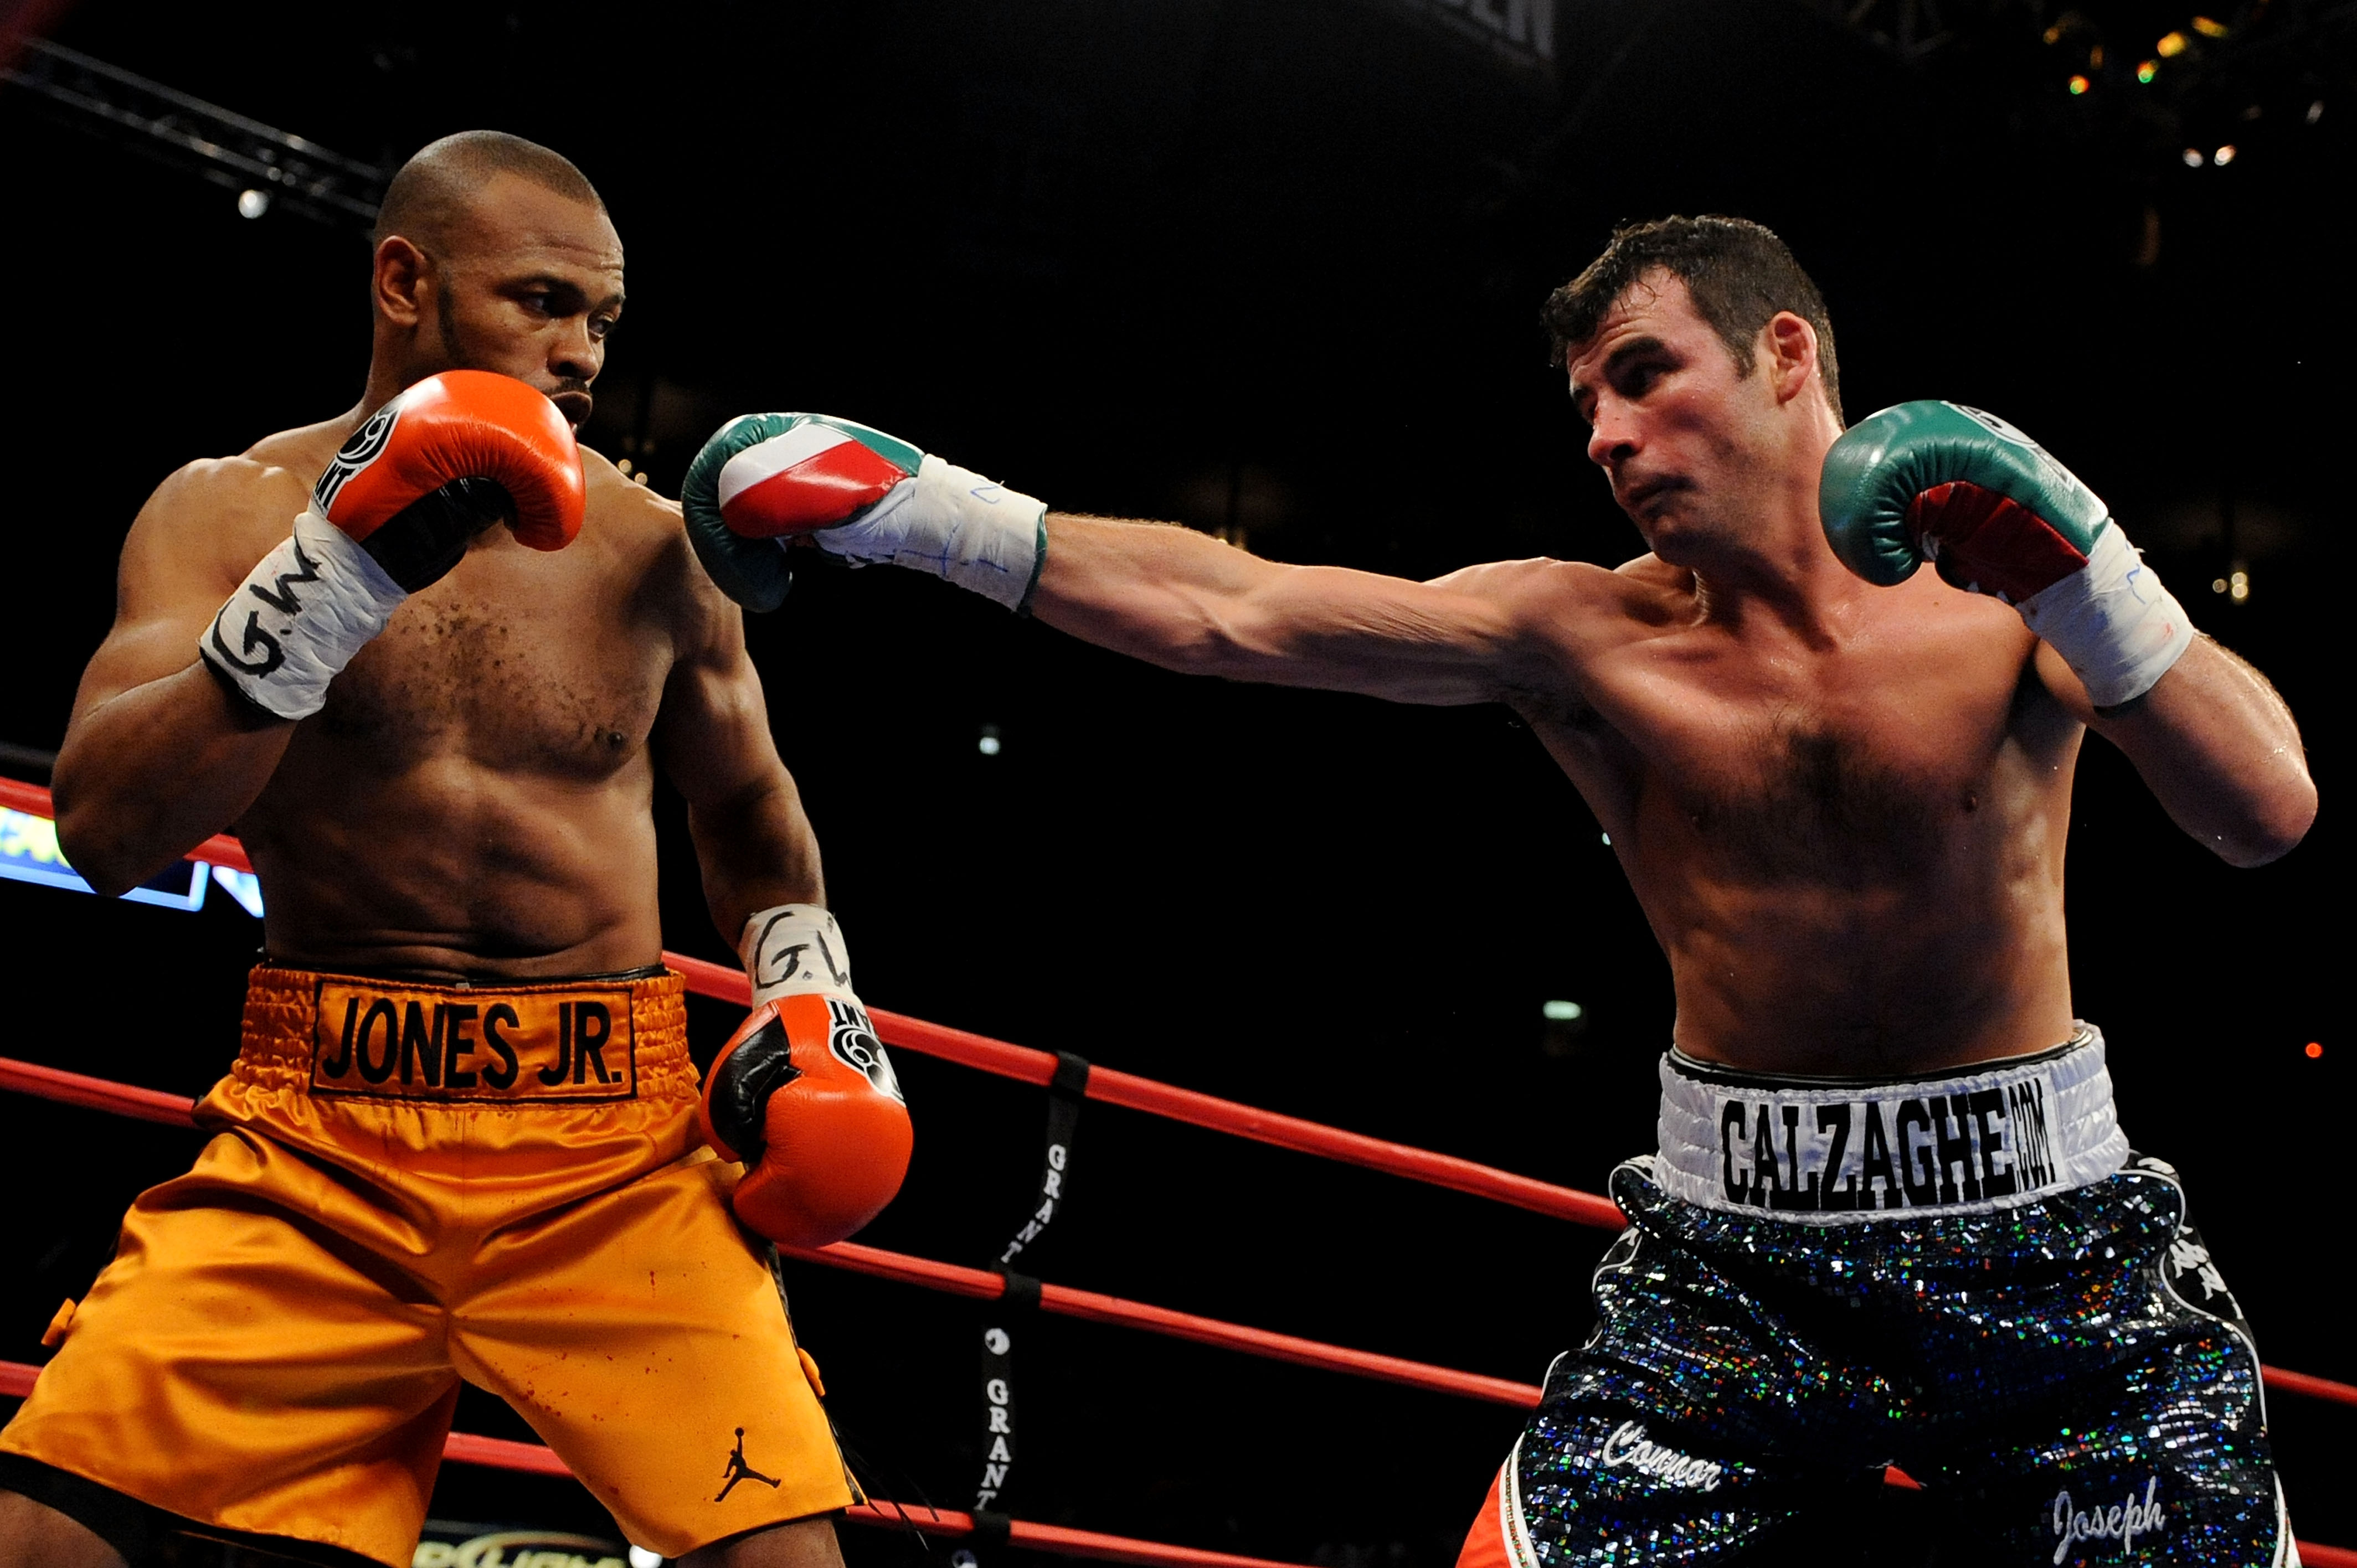 NEW YORK - NOVEMBER 08:  Joe Calzaghe (R) punches Roy Jones Jr (L) during their Ring Magazine Light Heavyweight Championship bout at Madison Square Garden November 8, 2008 in New York City.  (Photo by Al Bello/Getty Images)